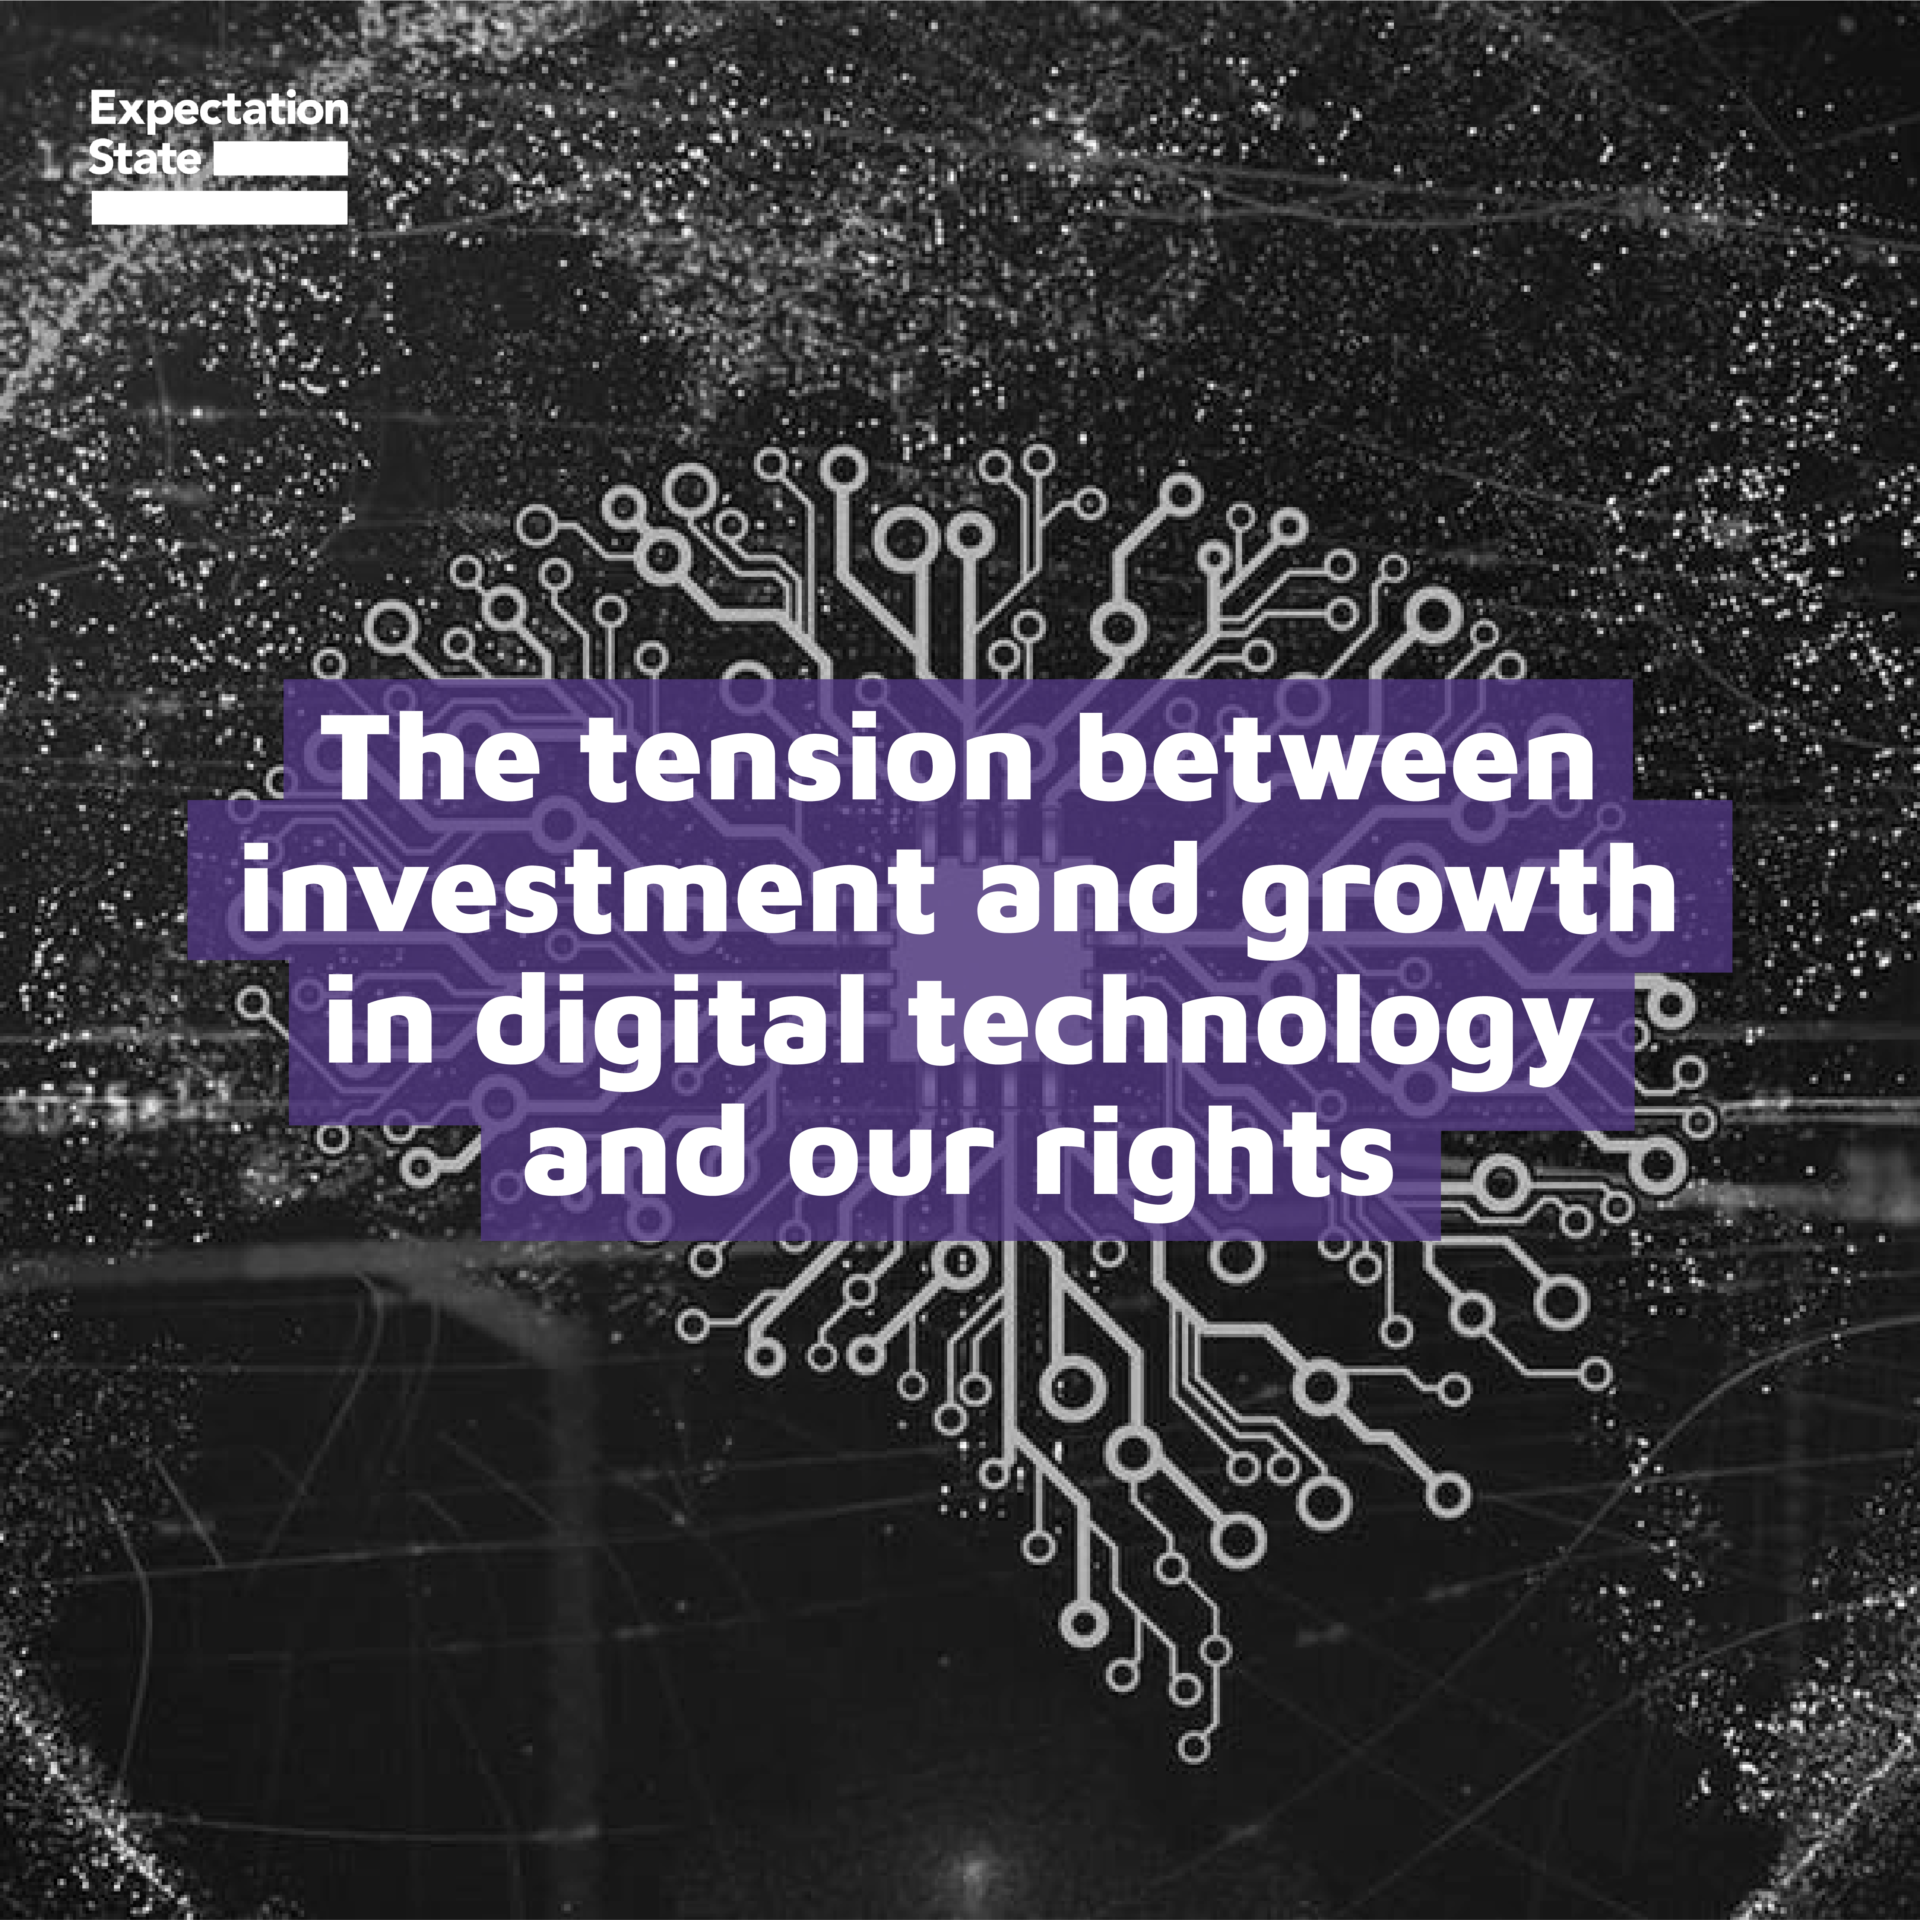 Identifying Tensions Between Investment and Digital Rights